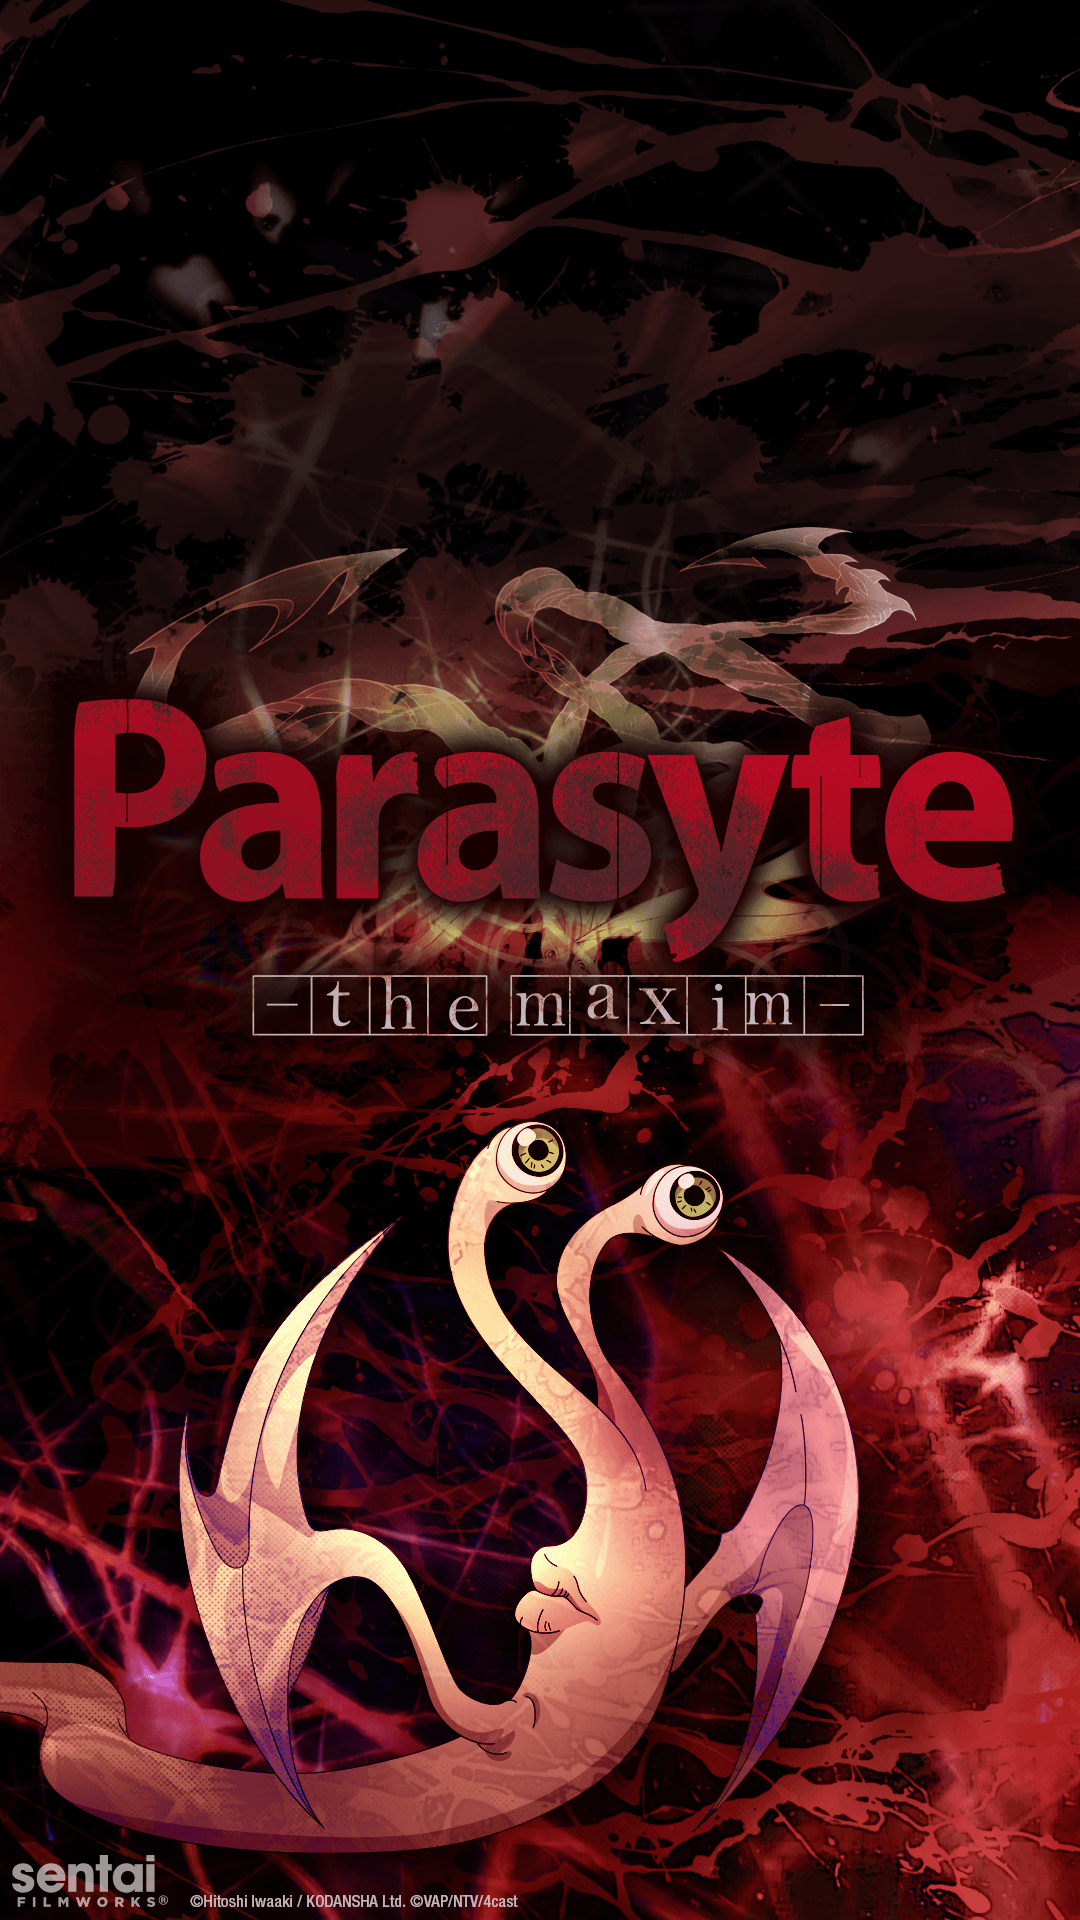 Limited time HD wallpaper of Parasyte. A thank you gift